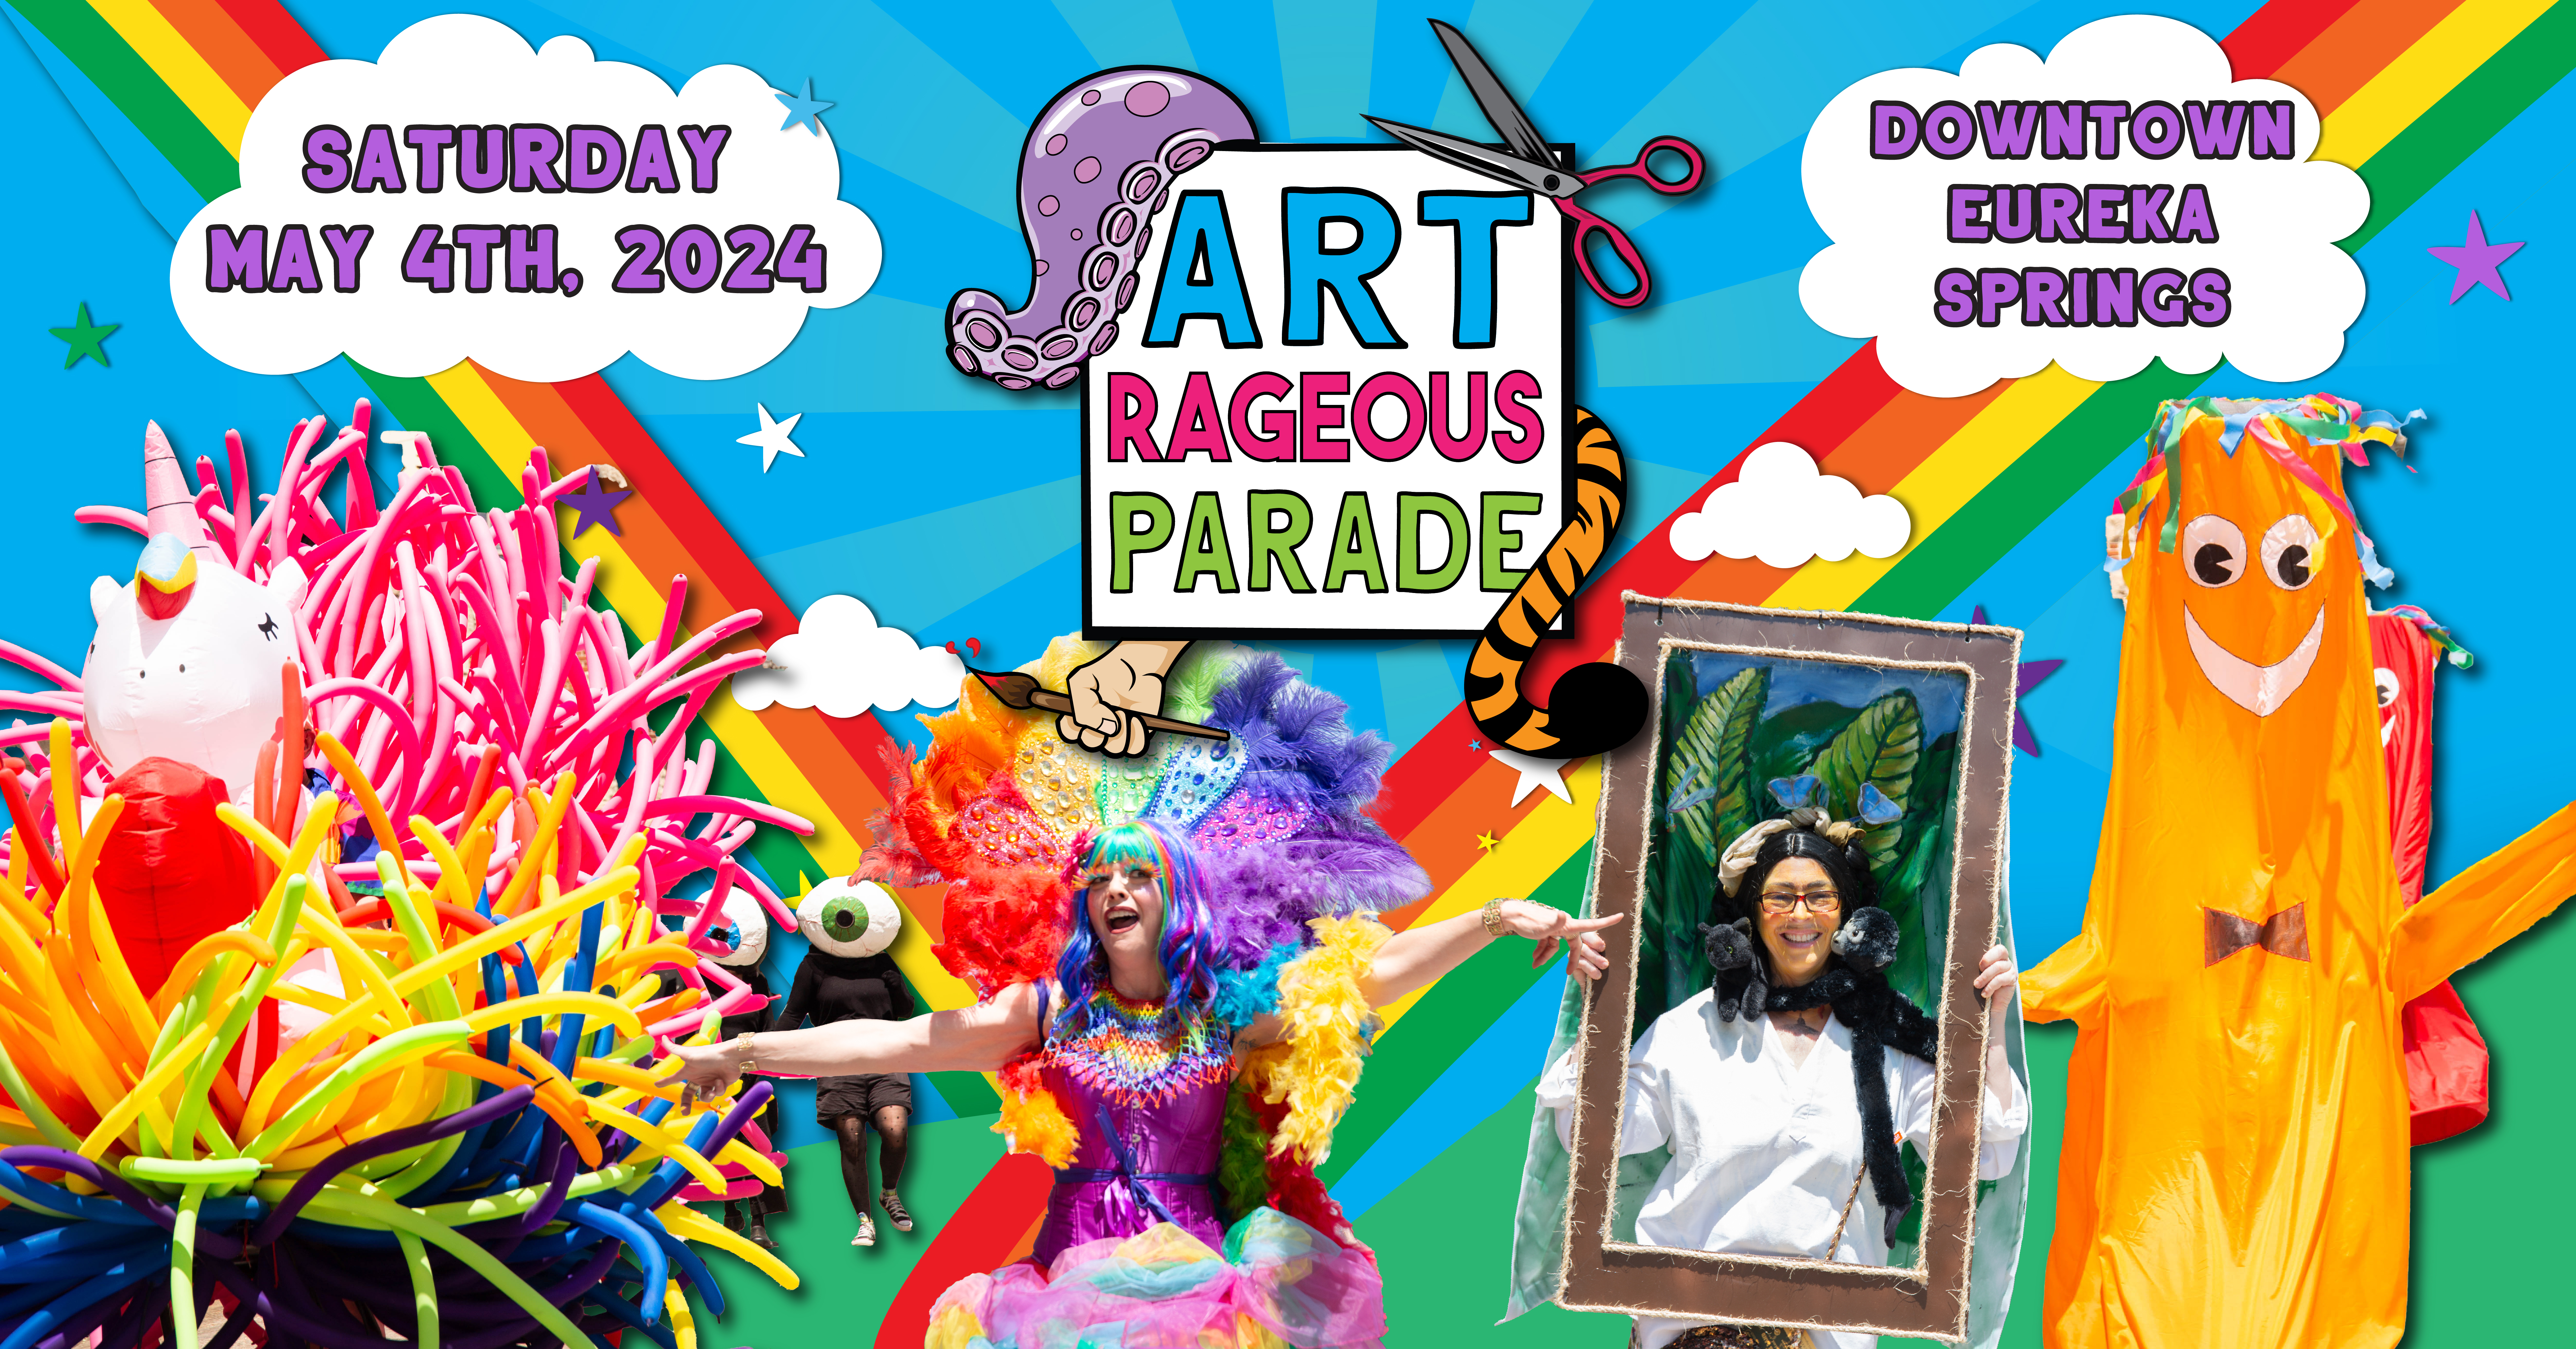 Featured image for “The ARTrageous Parade Hosted by ESSA”